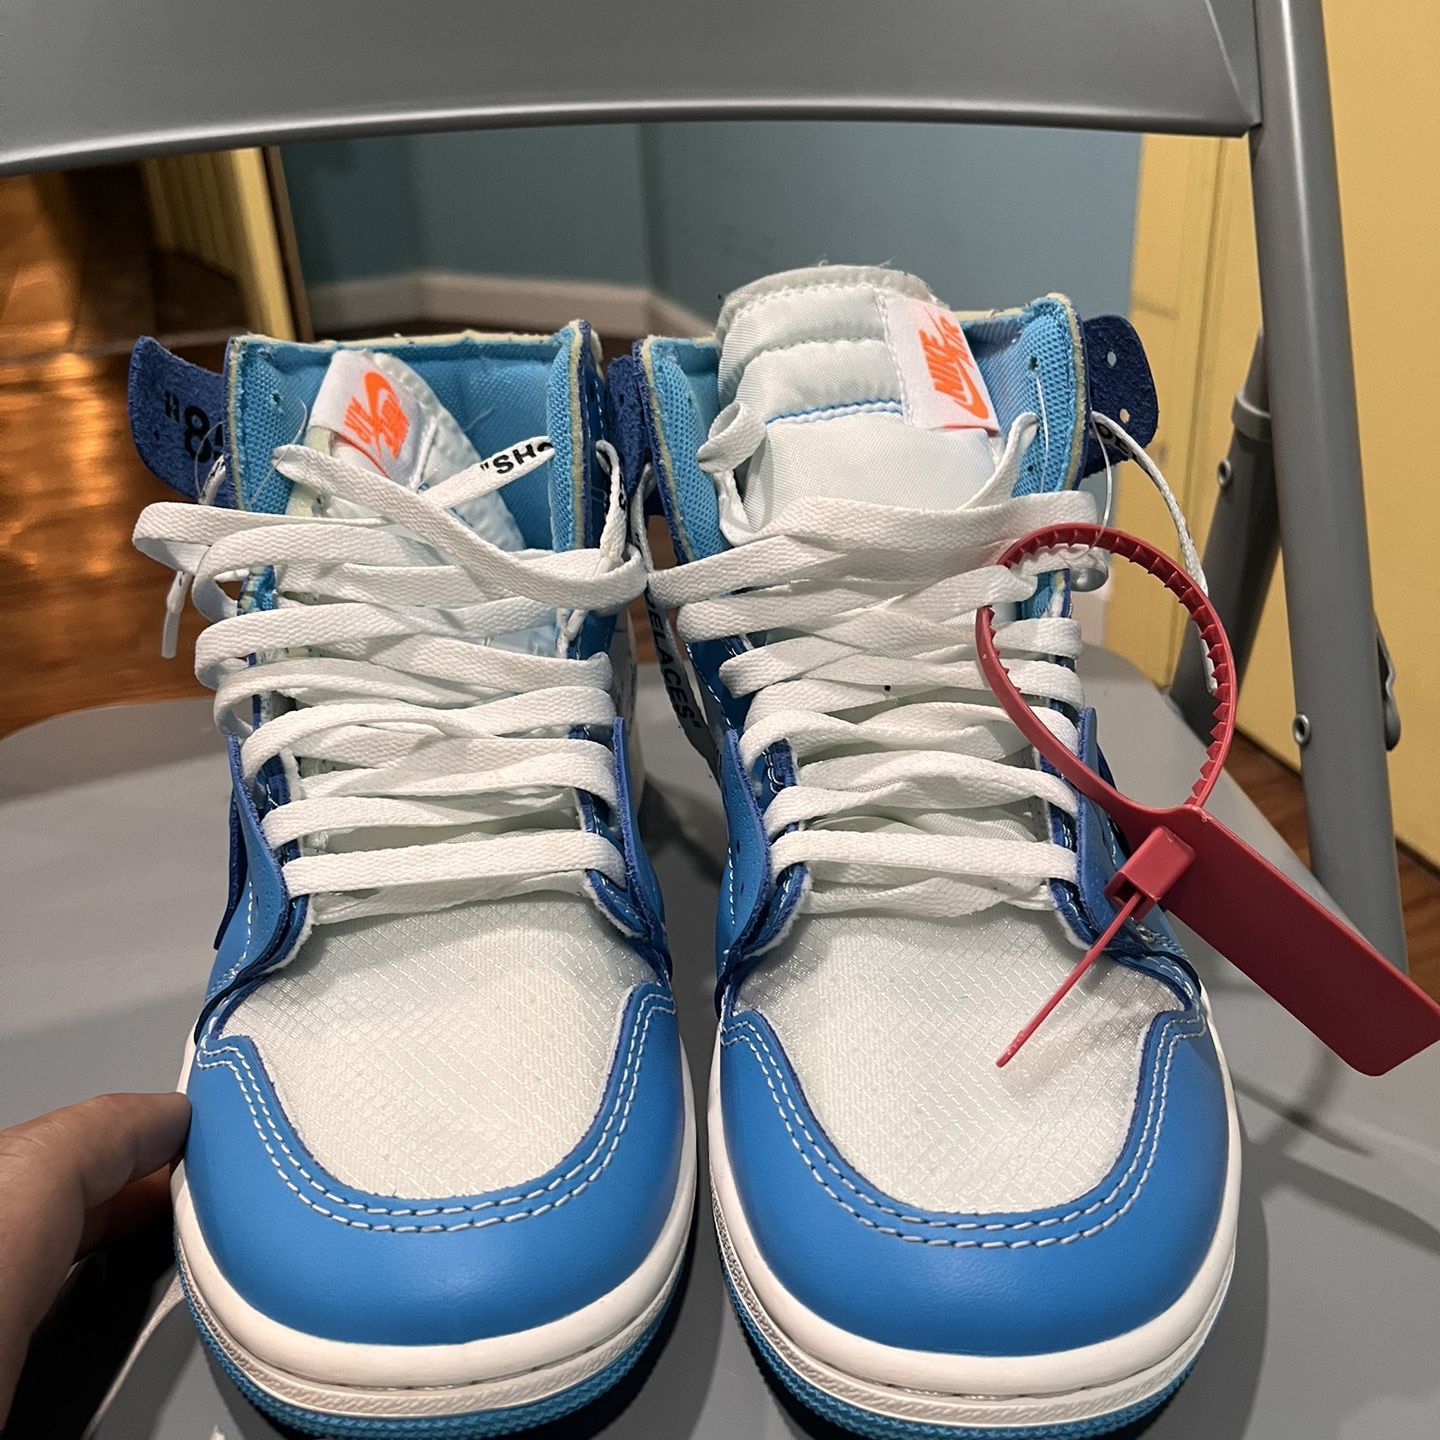 Off white jordan 1 retro high og UNC size 9 - clothing & accessories - by  owner - apparel sale - craigslist